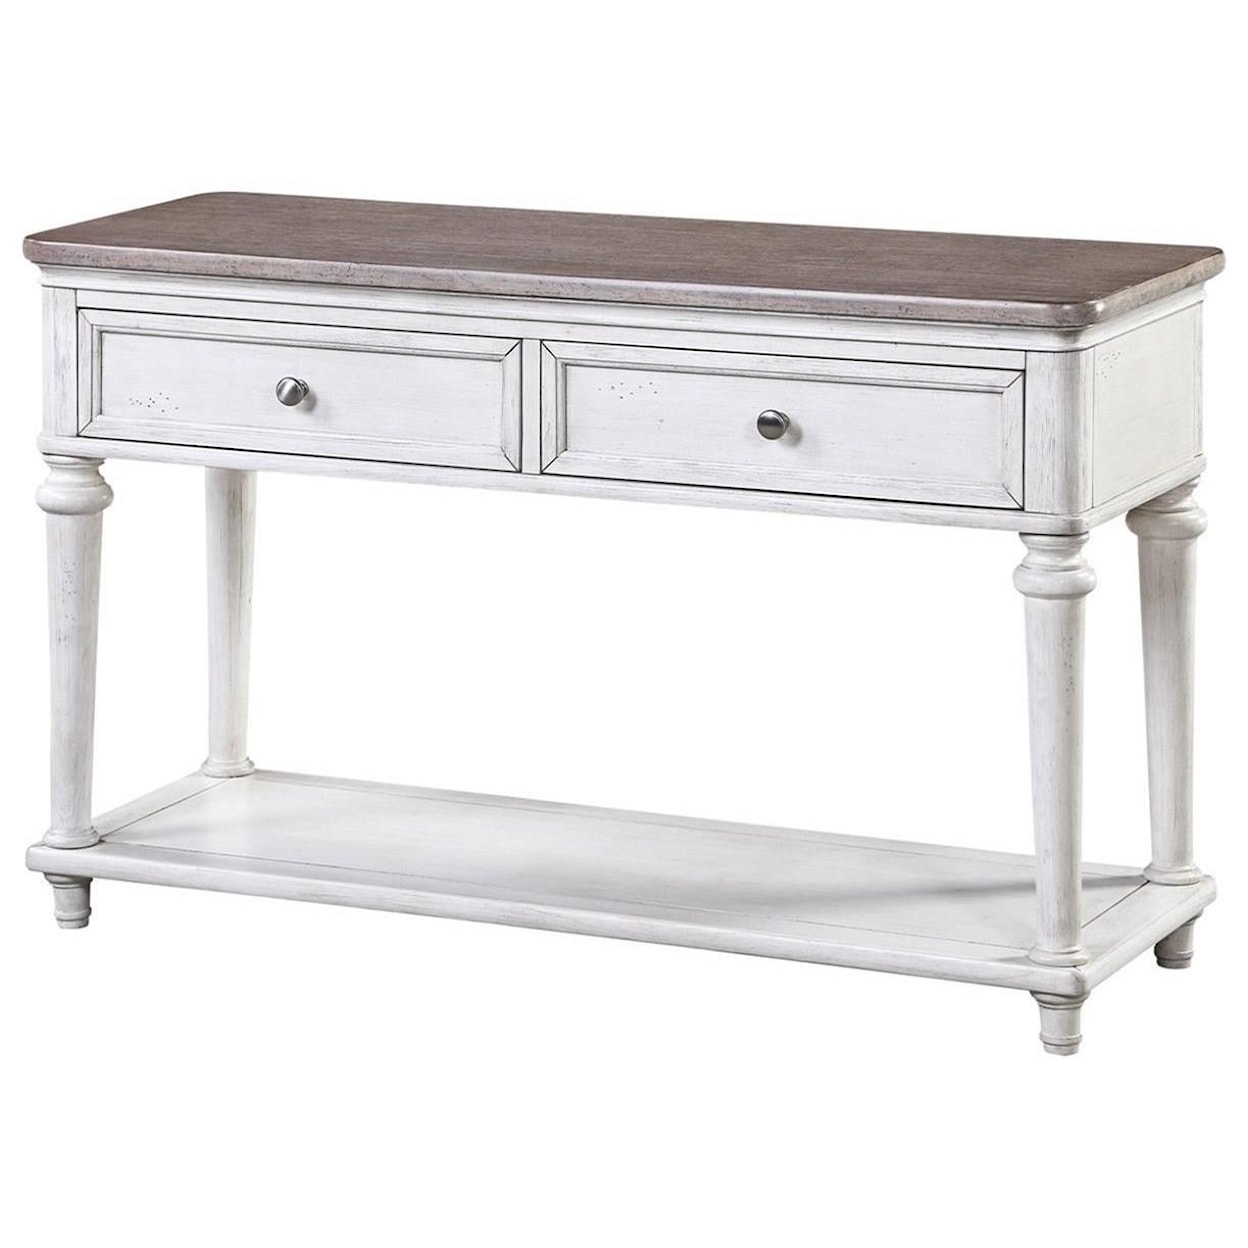 Panama Jack by Palmetto Home Sonoma Console Table